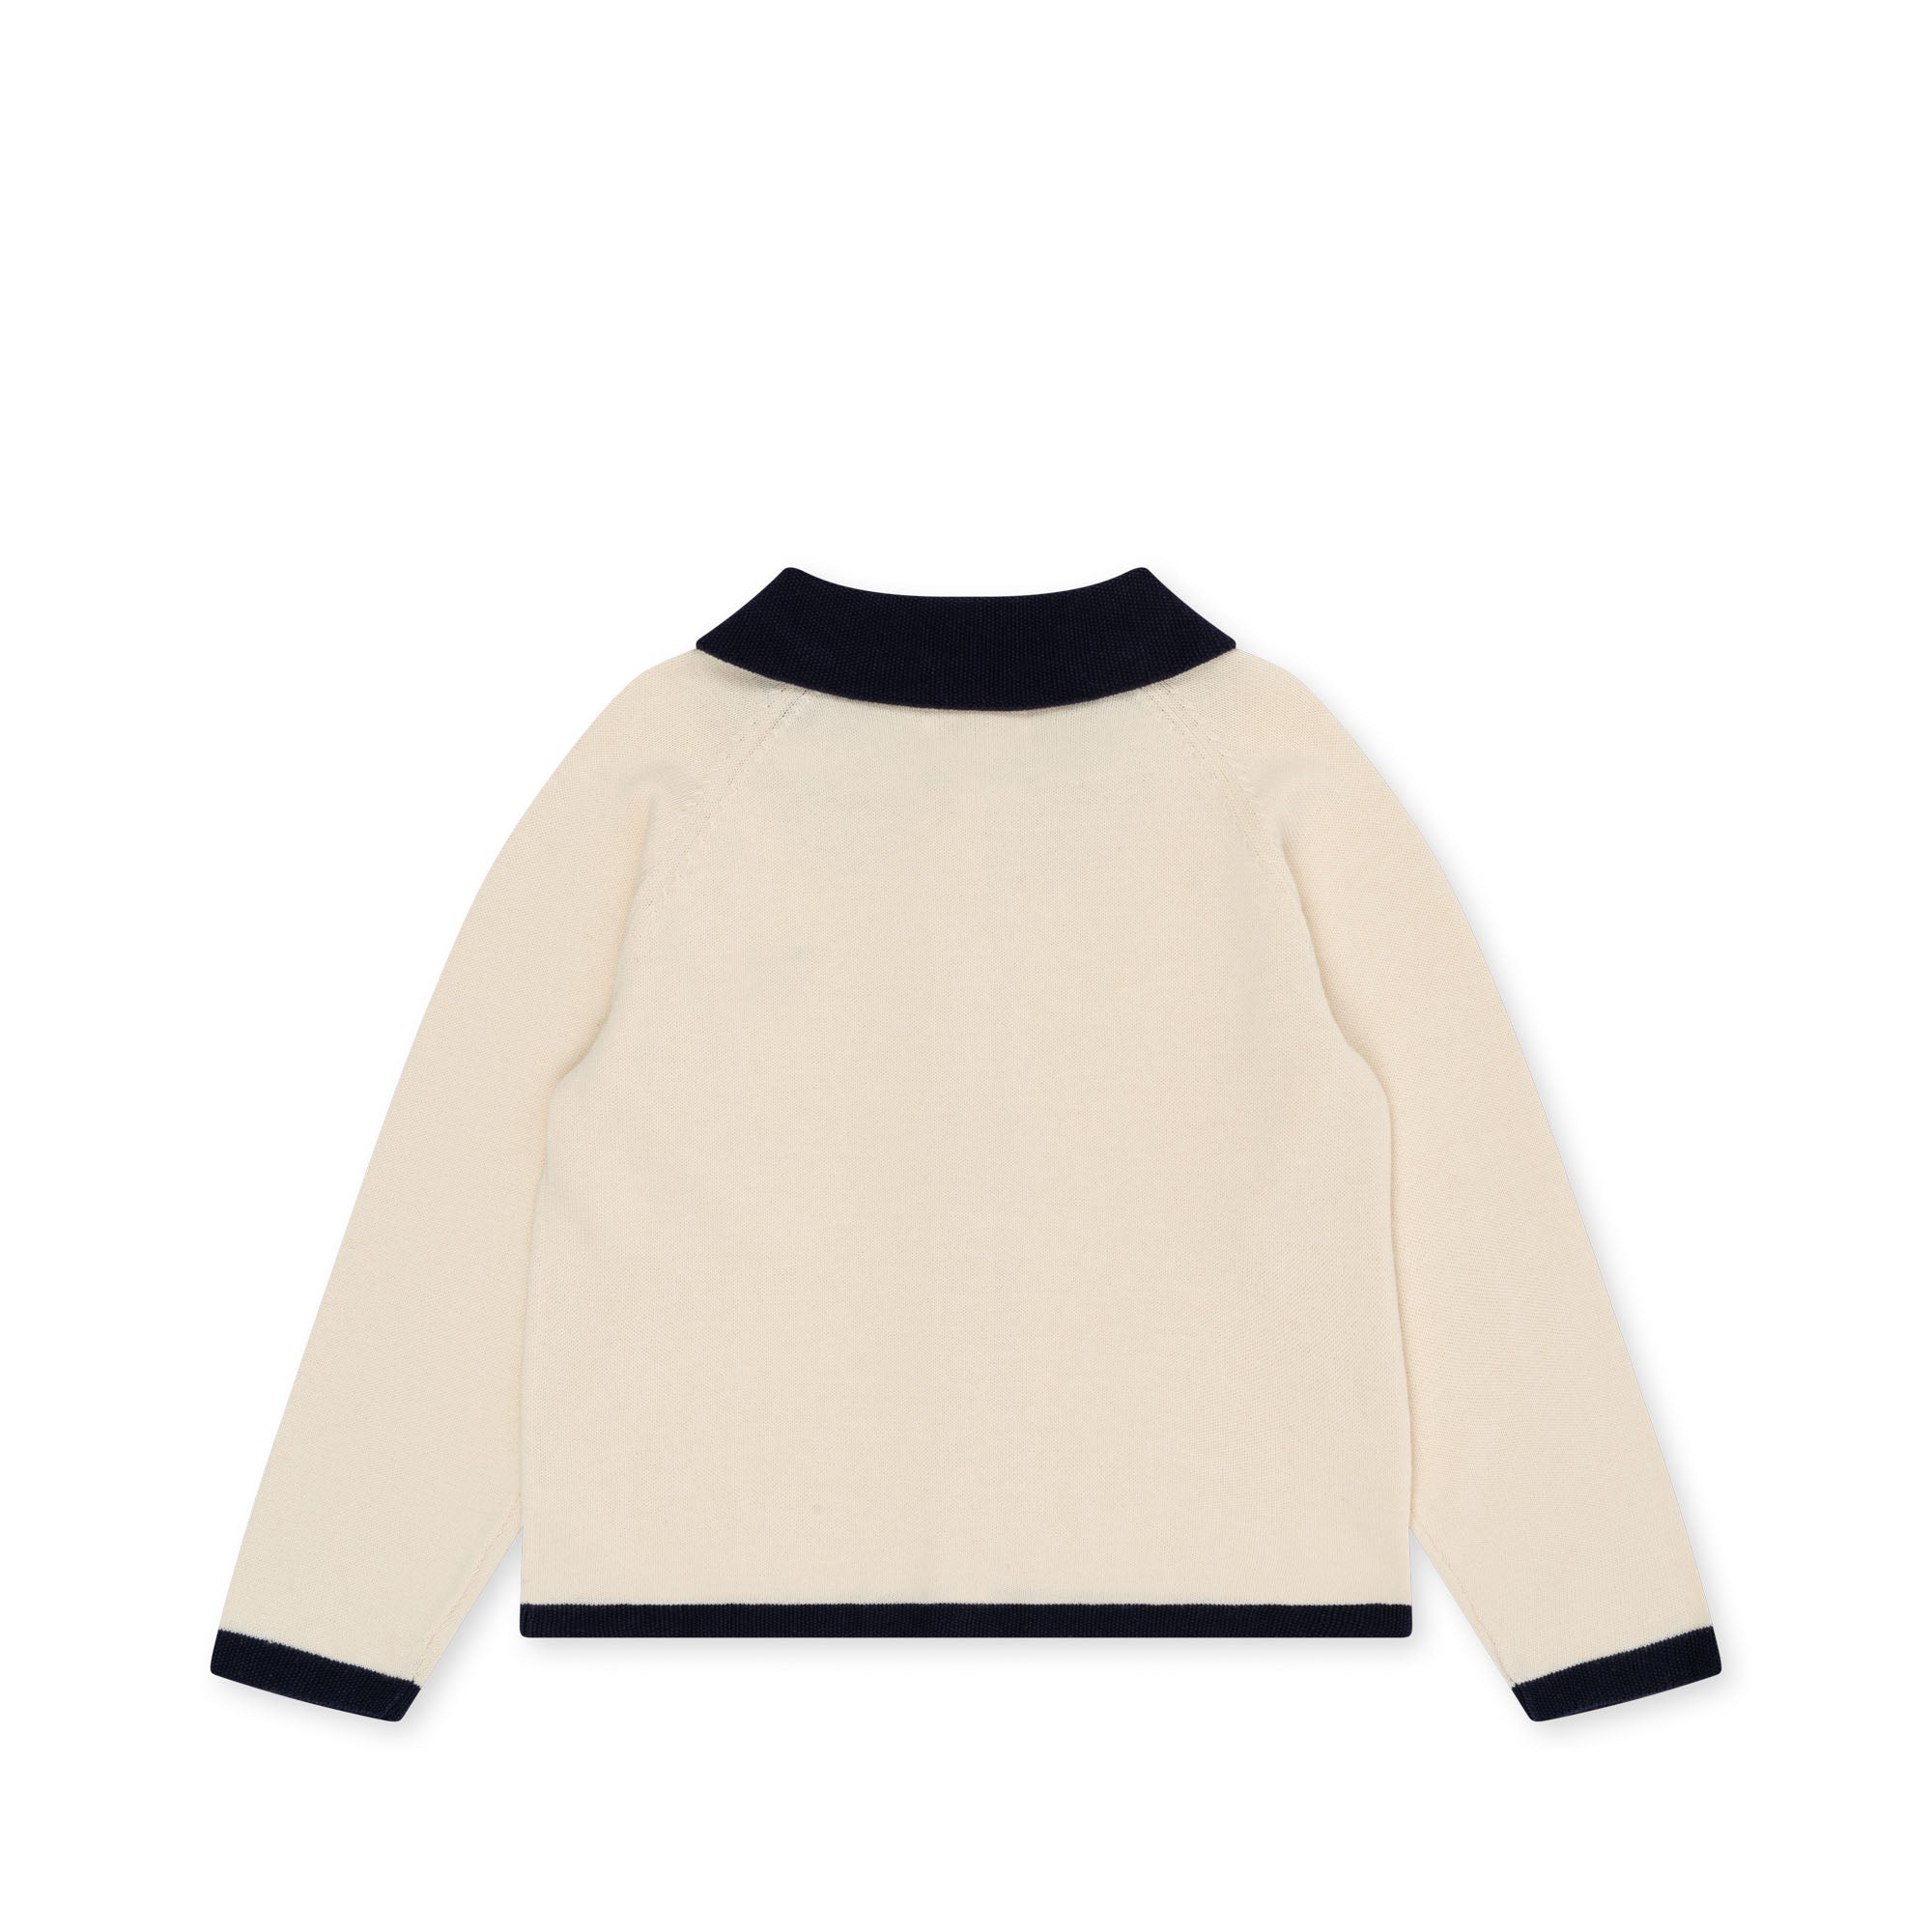 Konges Sløjd A/S Cardigans - Tricot off white